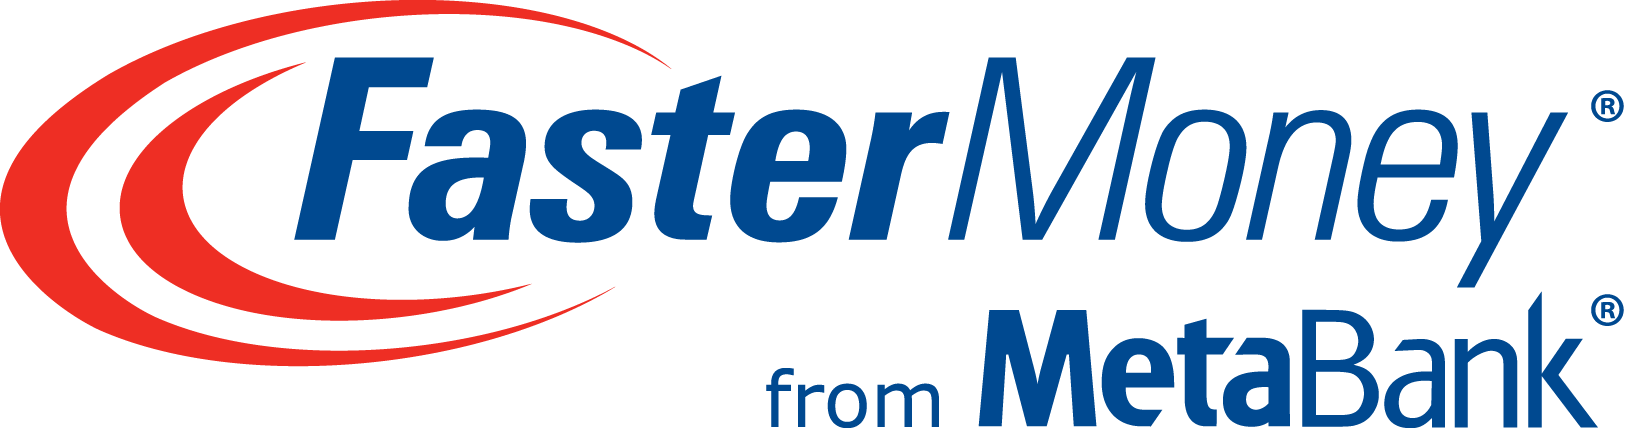 MetaBank Logo - Prepaid Visa Debit Cards | Faster Payments with FasterMoney